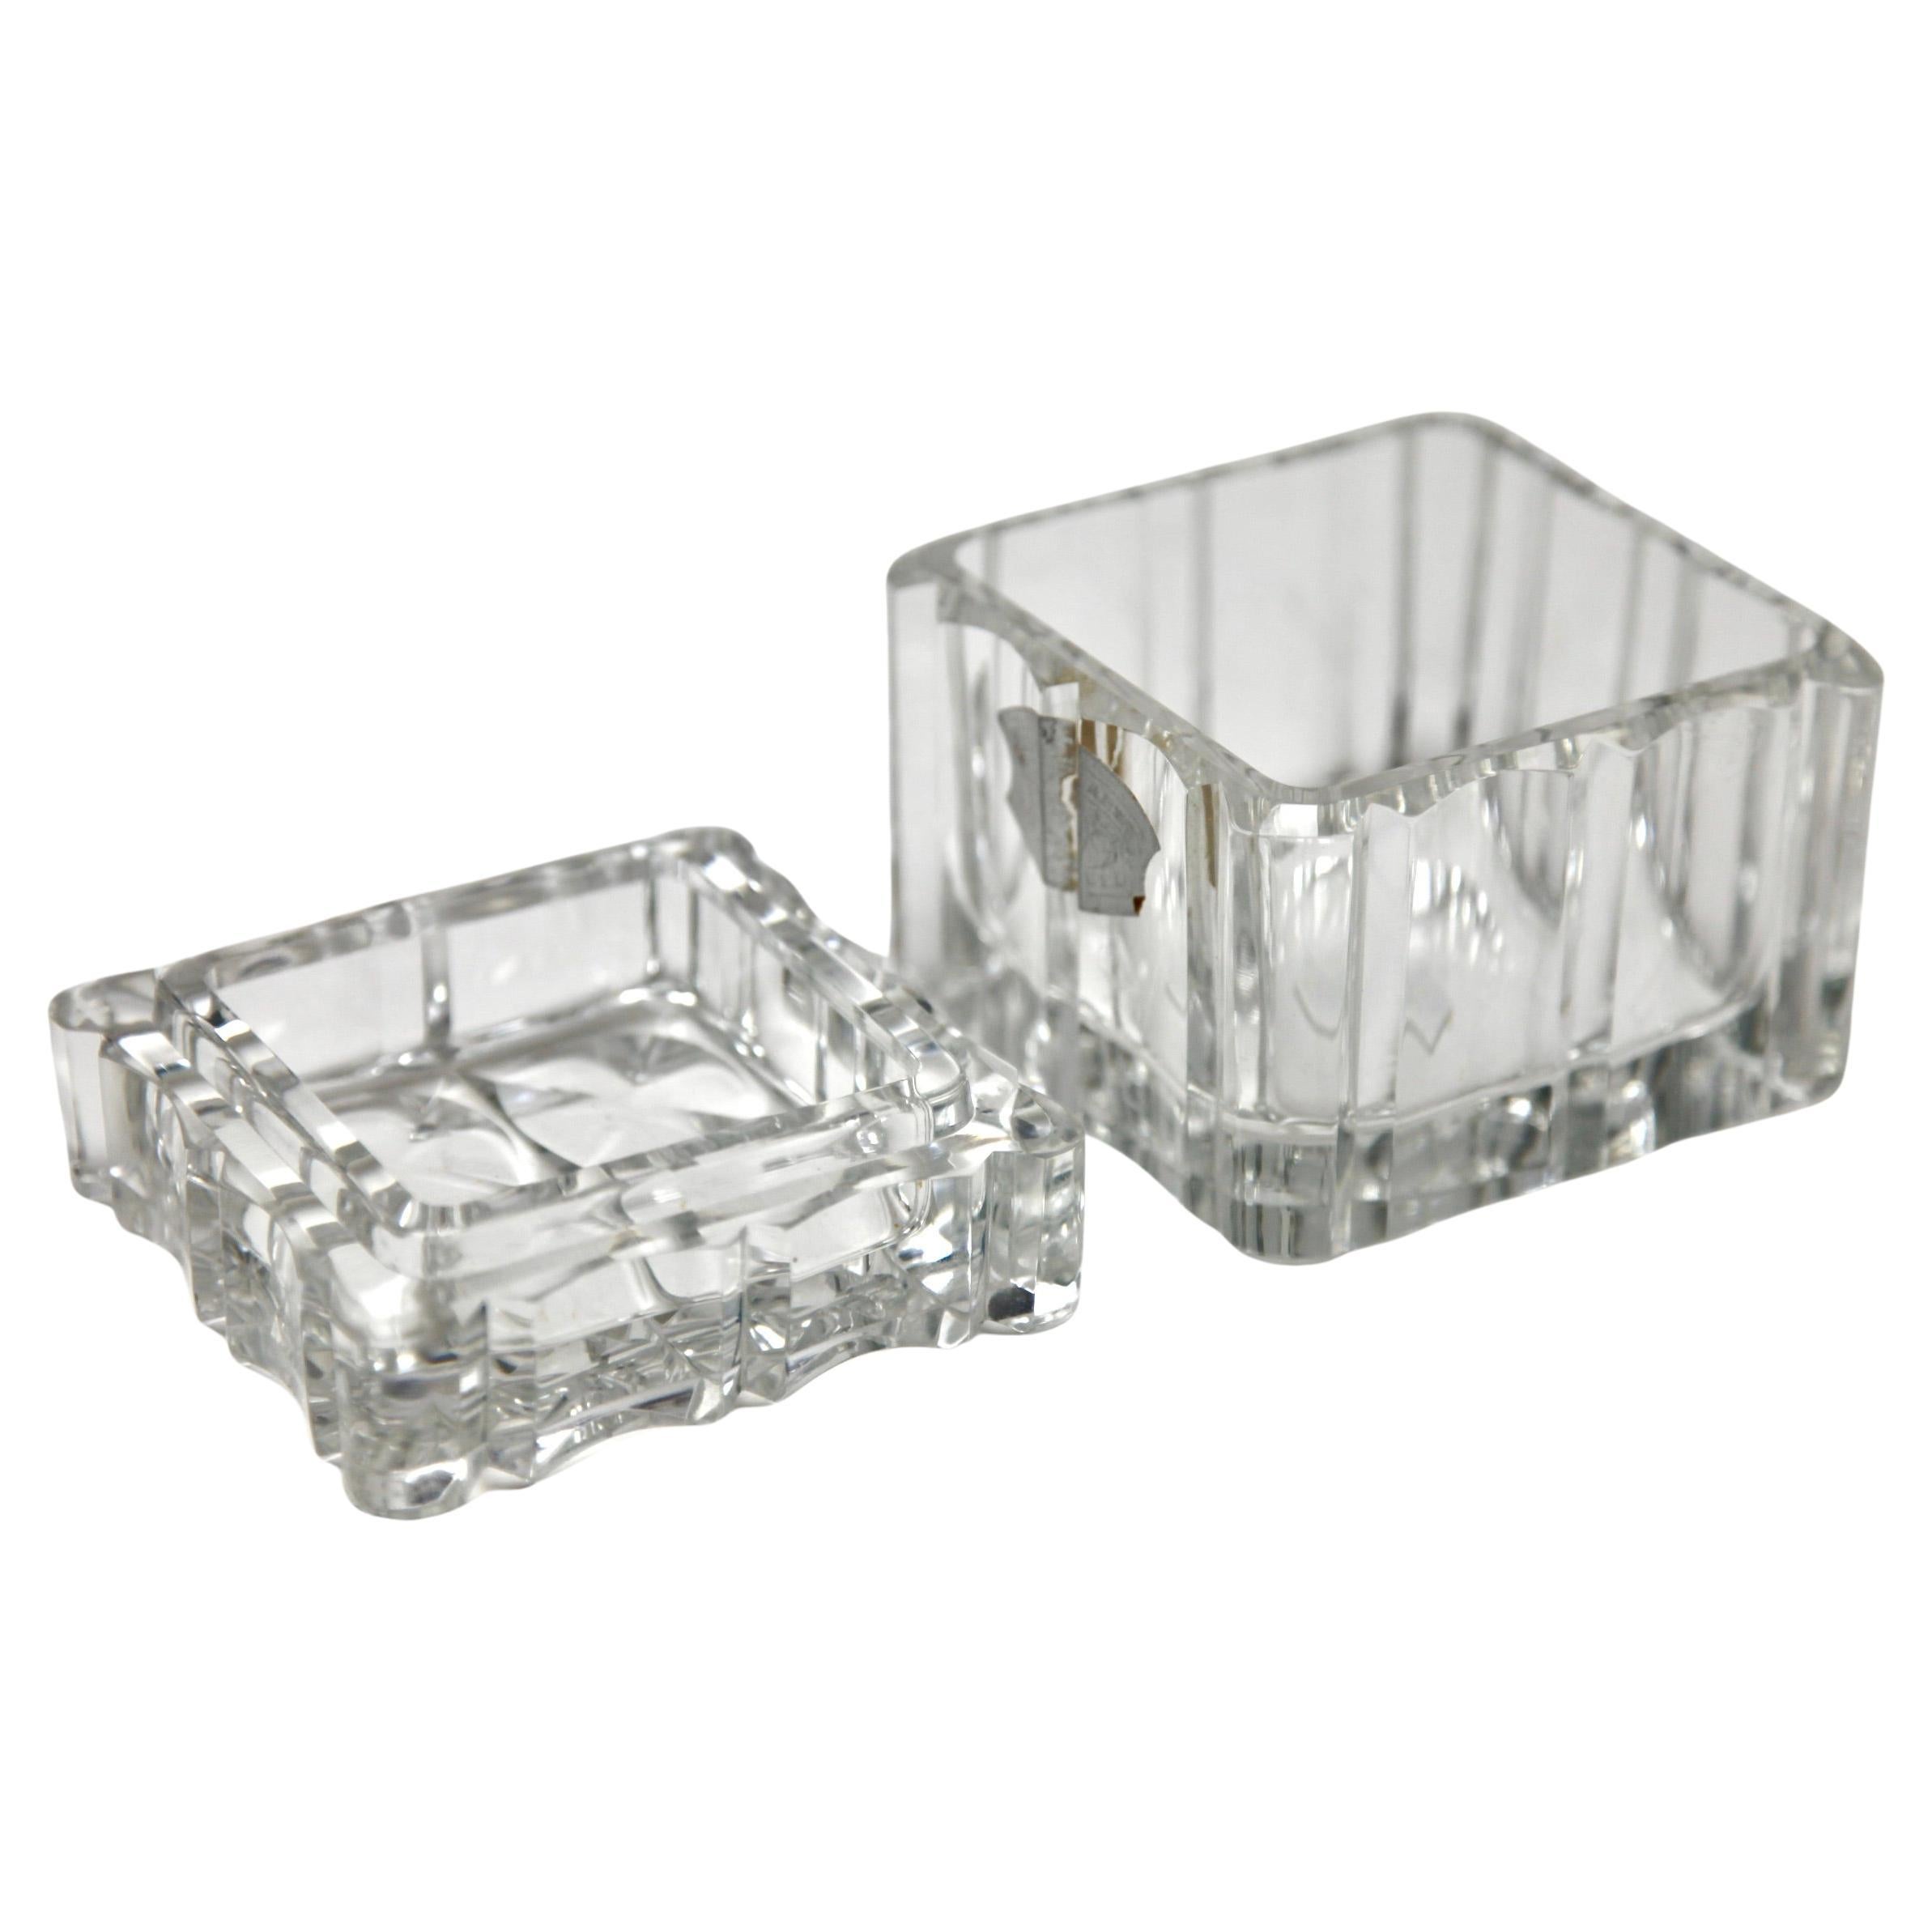 Mid-20th Century Val Saint Lambert Crystal Set of 3, Belgium in Good Condition, 1950s For Sale